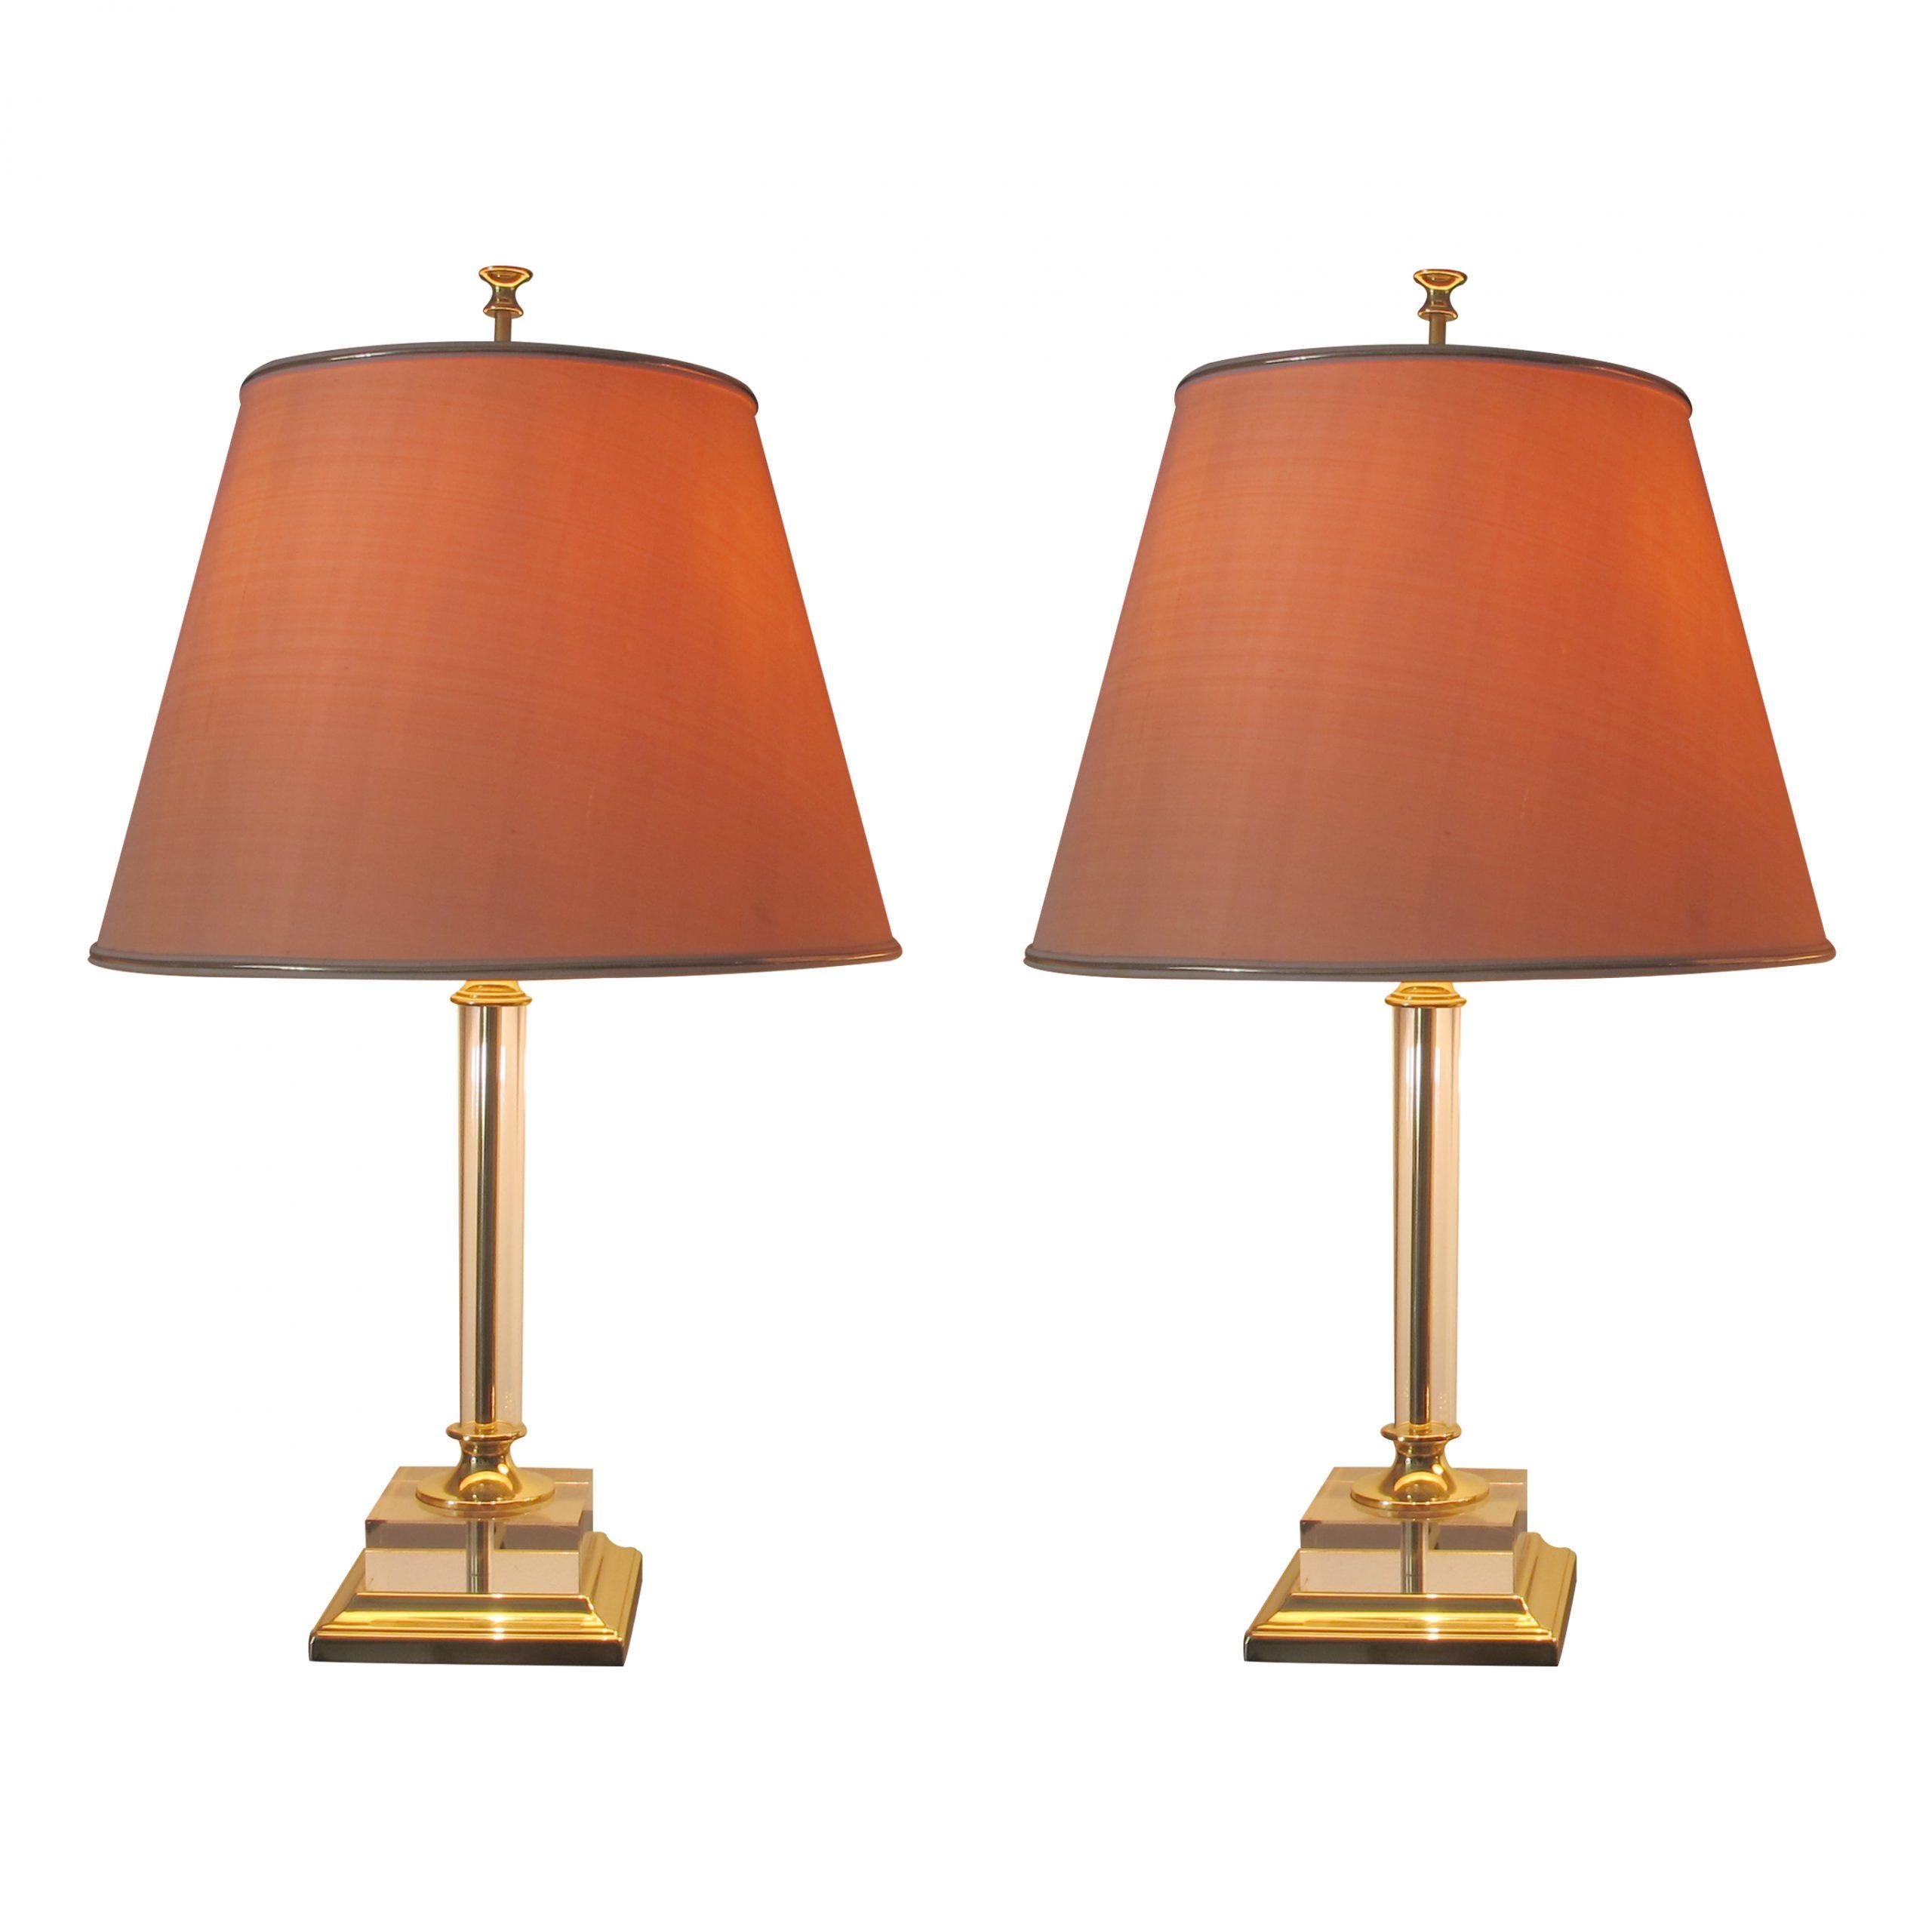 Italian large pair of lucite and brass table lamps with their original shades, in great condition. This is a timeless elegant design; the lamps are presented on a brass base with a thick acrylic square and a tubular stem. The cream shades change